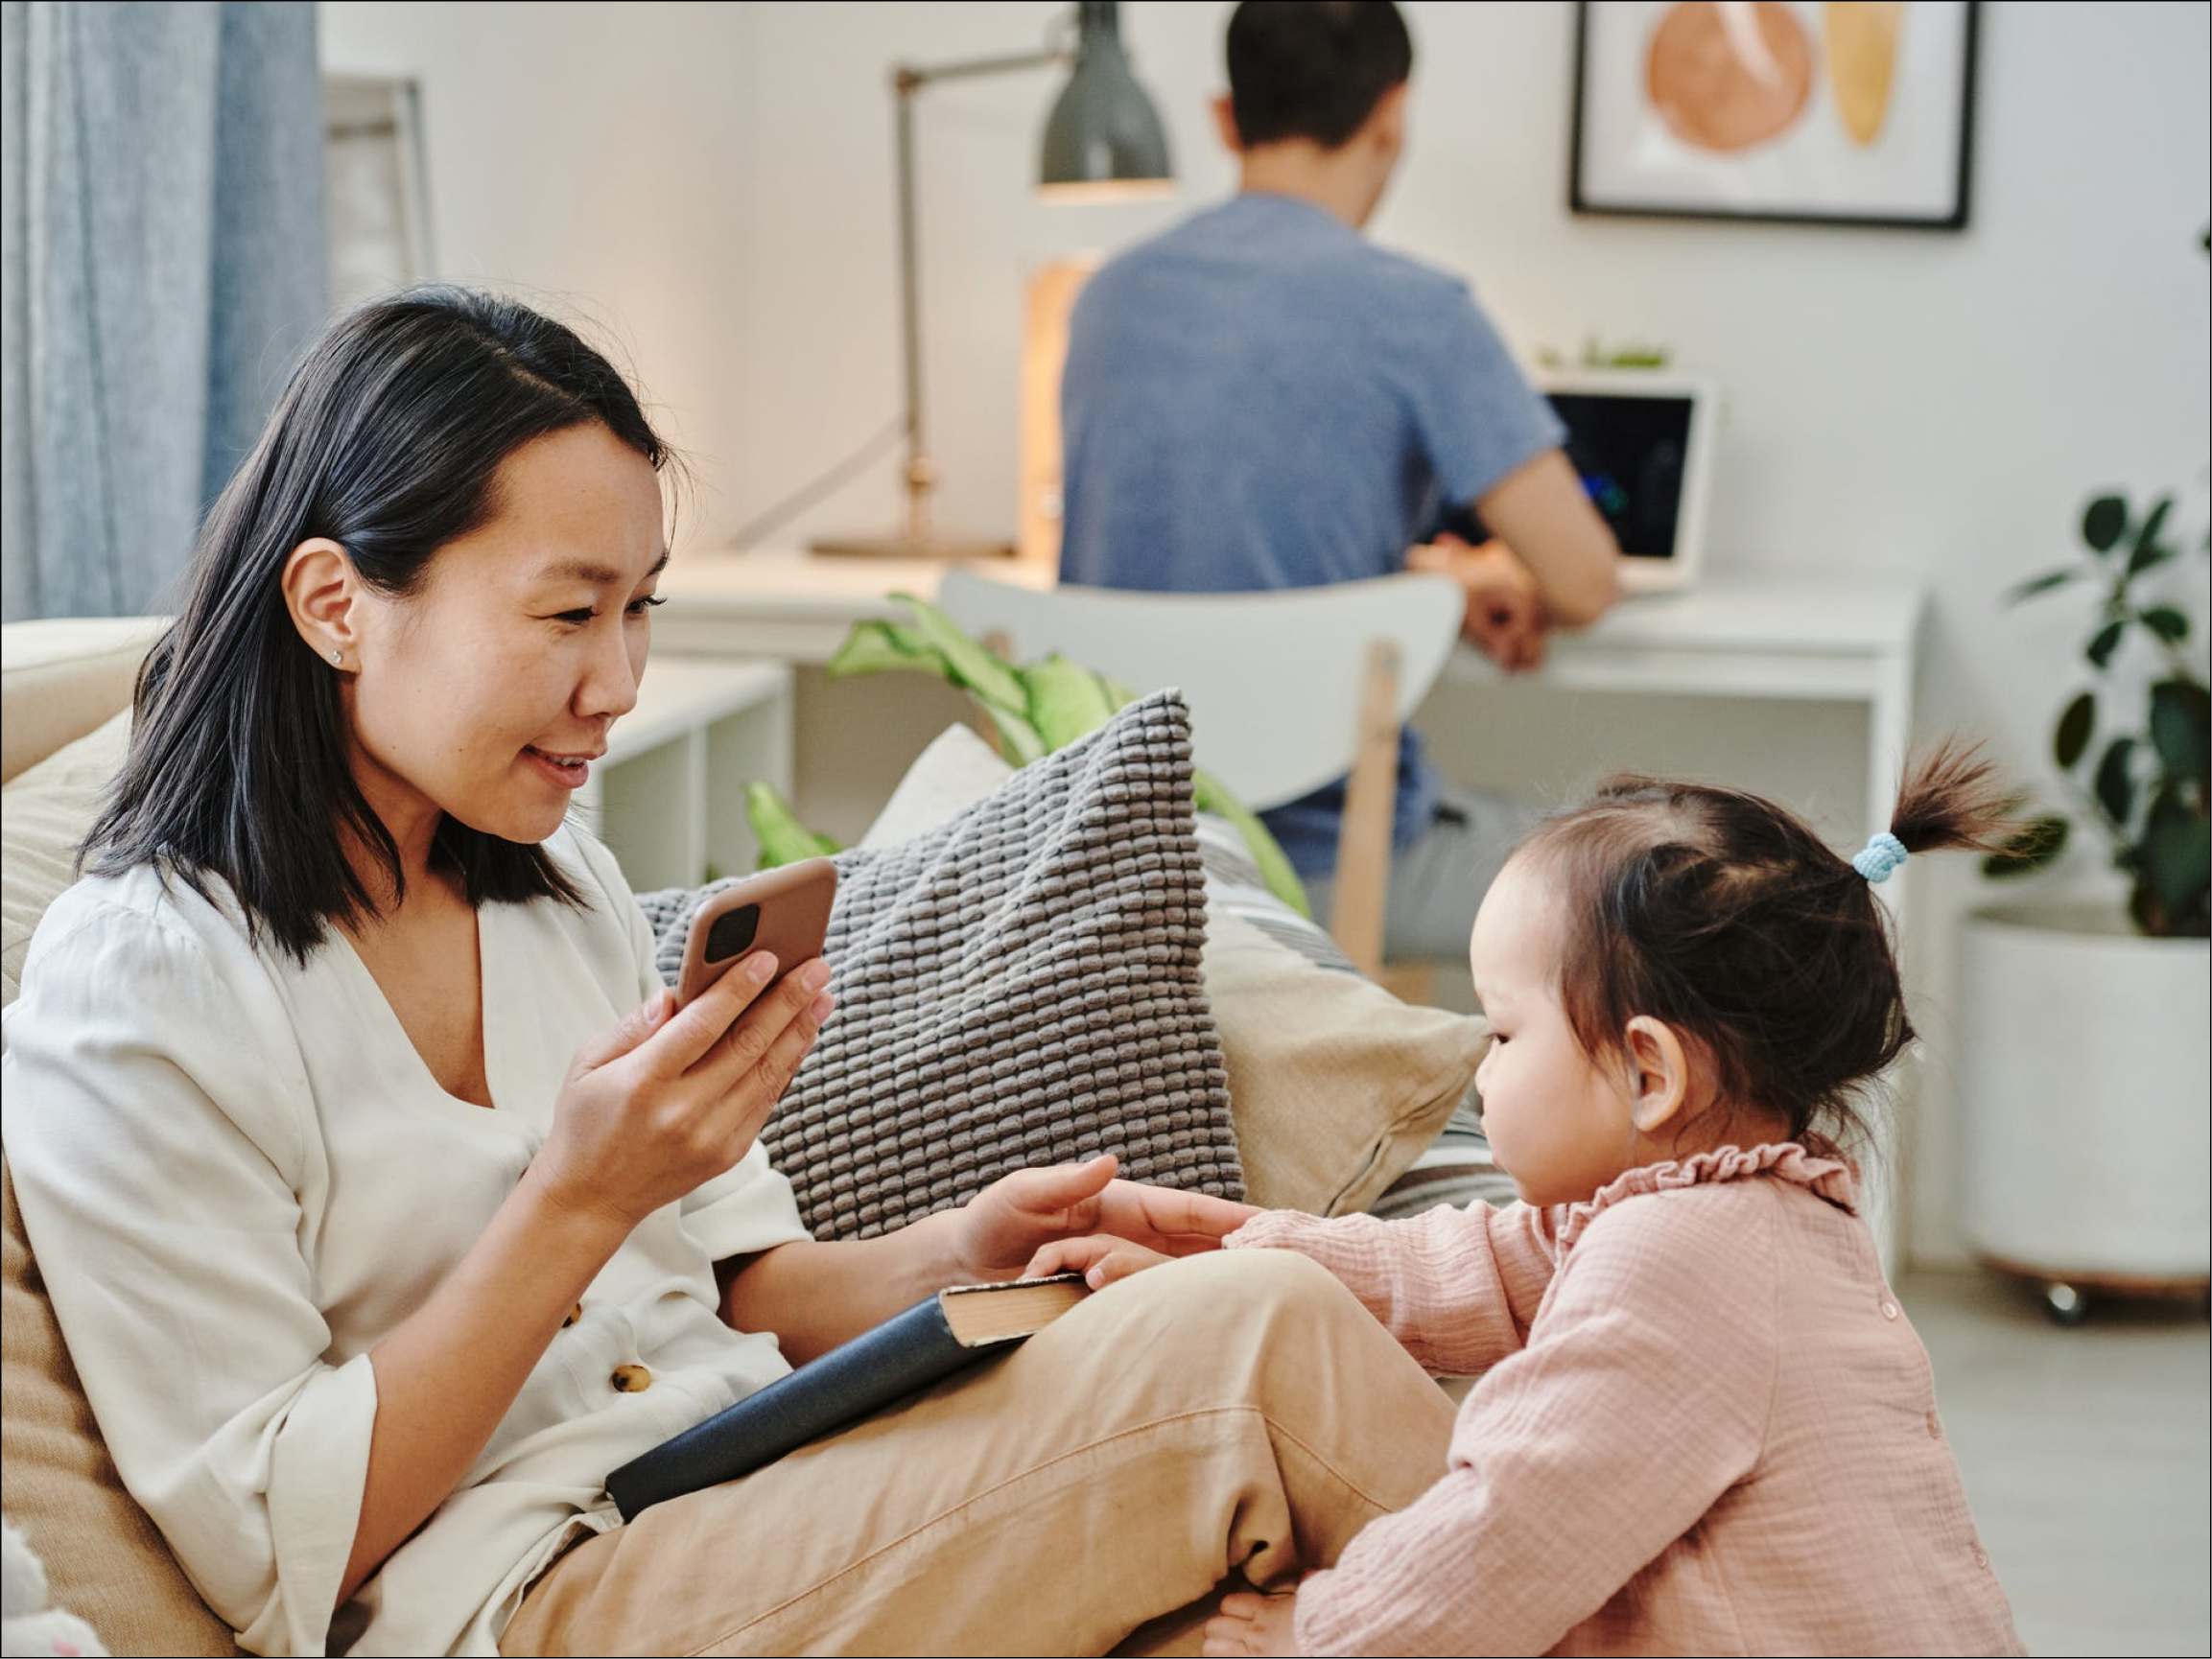 Image of renters and their child sitting in the bright living room, working and playing